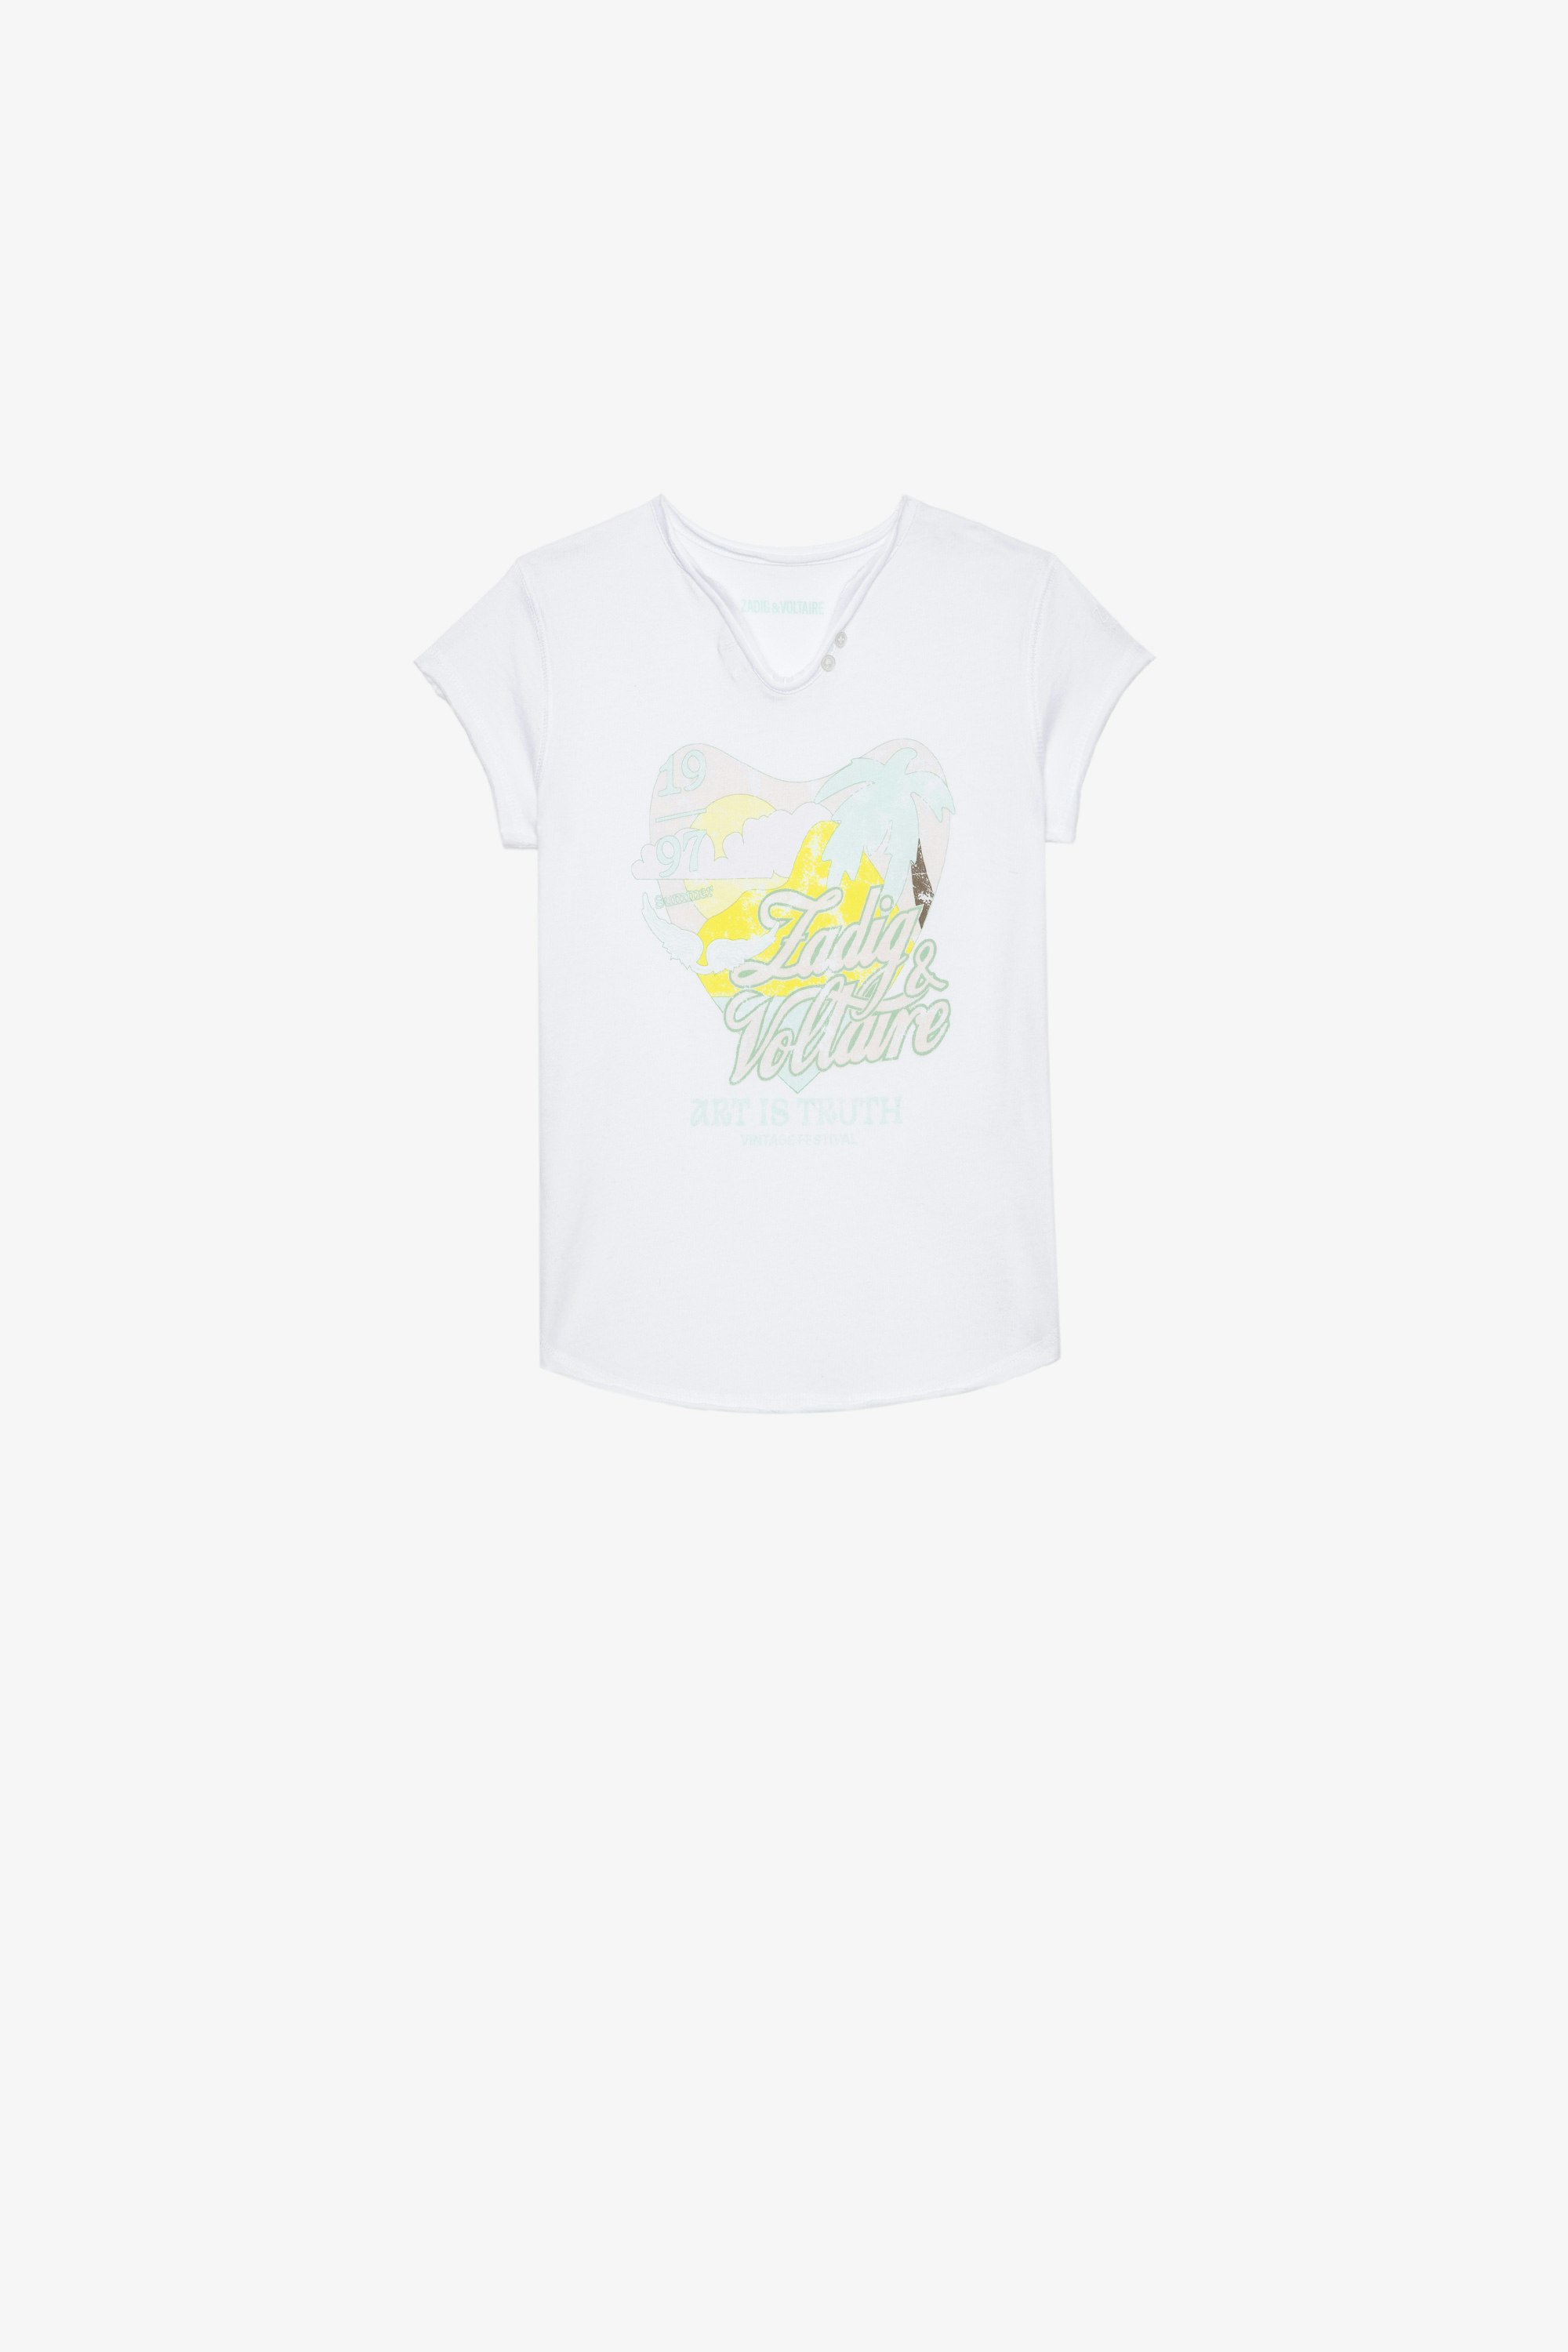 Boxo Kids' T-Shirt White cotton T-shirt with a metallic-effect crystal-studded print and embroidery